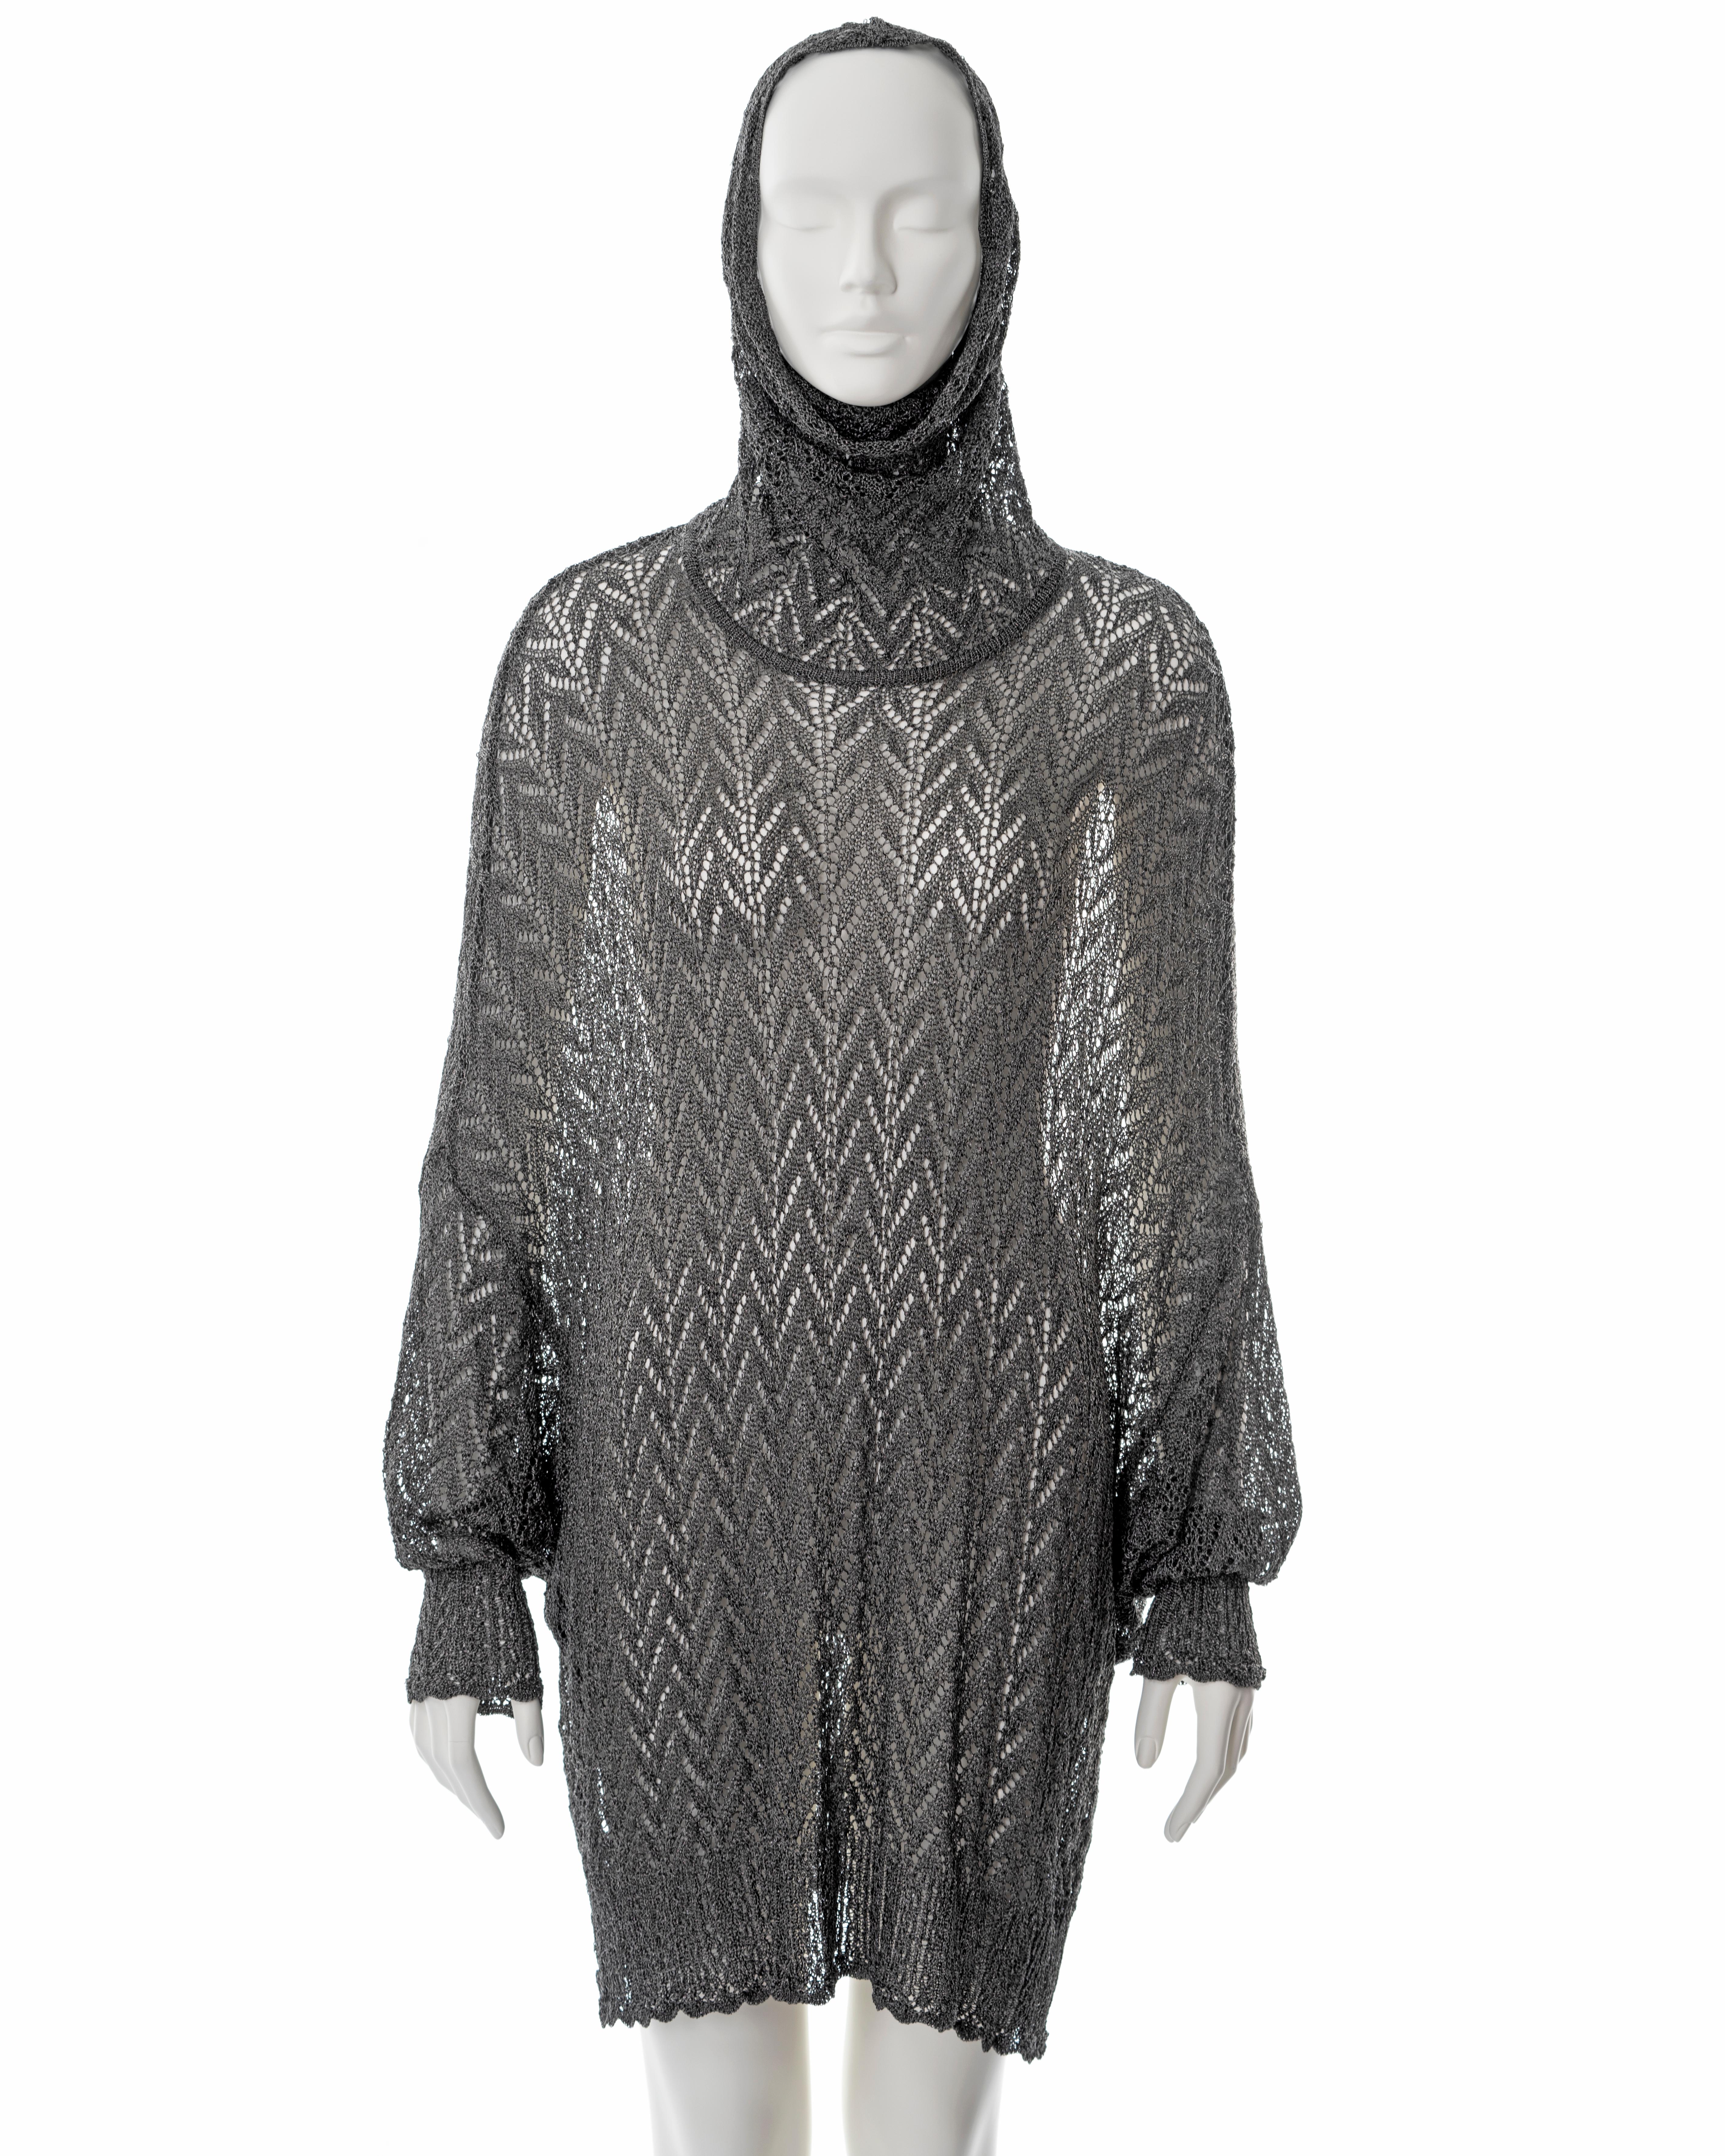 ▪ Christian Dior silver crochet sweater dress
▪ Designed by John Galliano
▪ Sold by One of a Kind Archive
▪ Fall-Winter 1998
▪ Long turtleneck doubles as a hood 
▪ Wide cut 
▪ Size Small
▪ Made in France

All photographs in this listing EXCLUDING